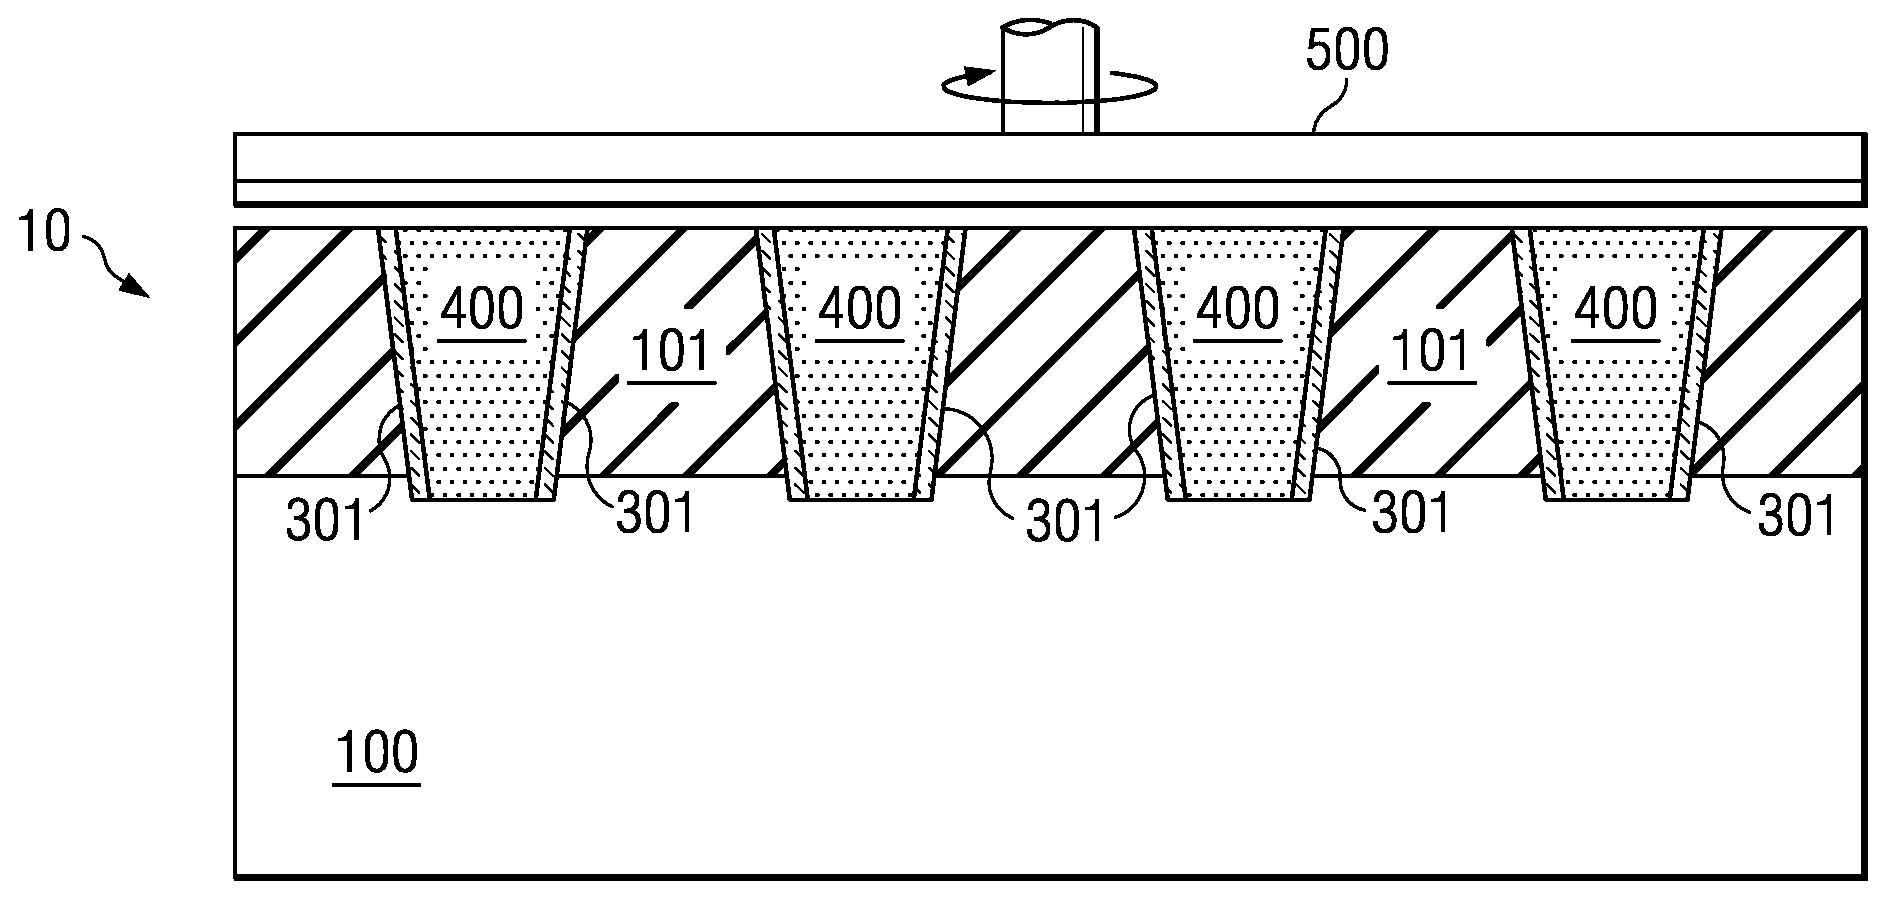 Threshold Voltage Consistency and Effective Width in Same-Substrate Device Groups